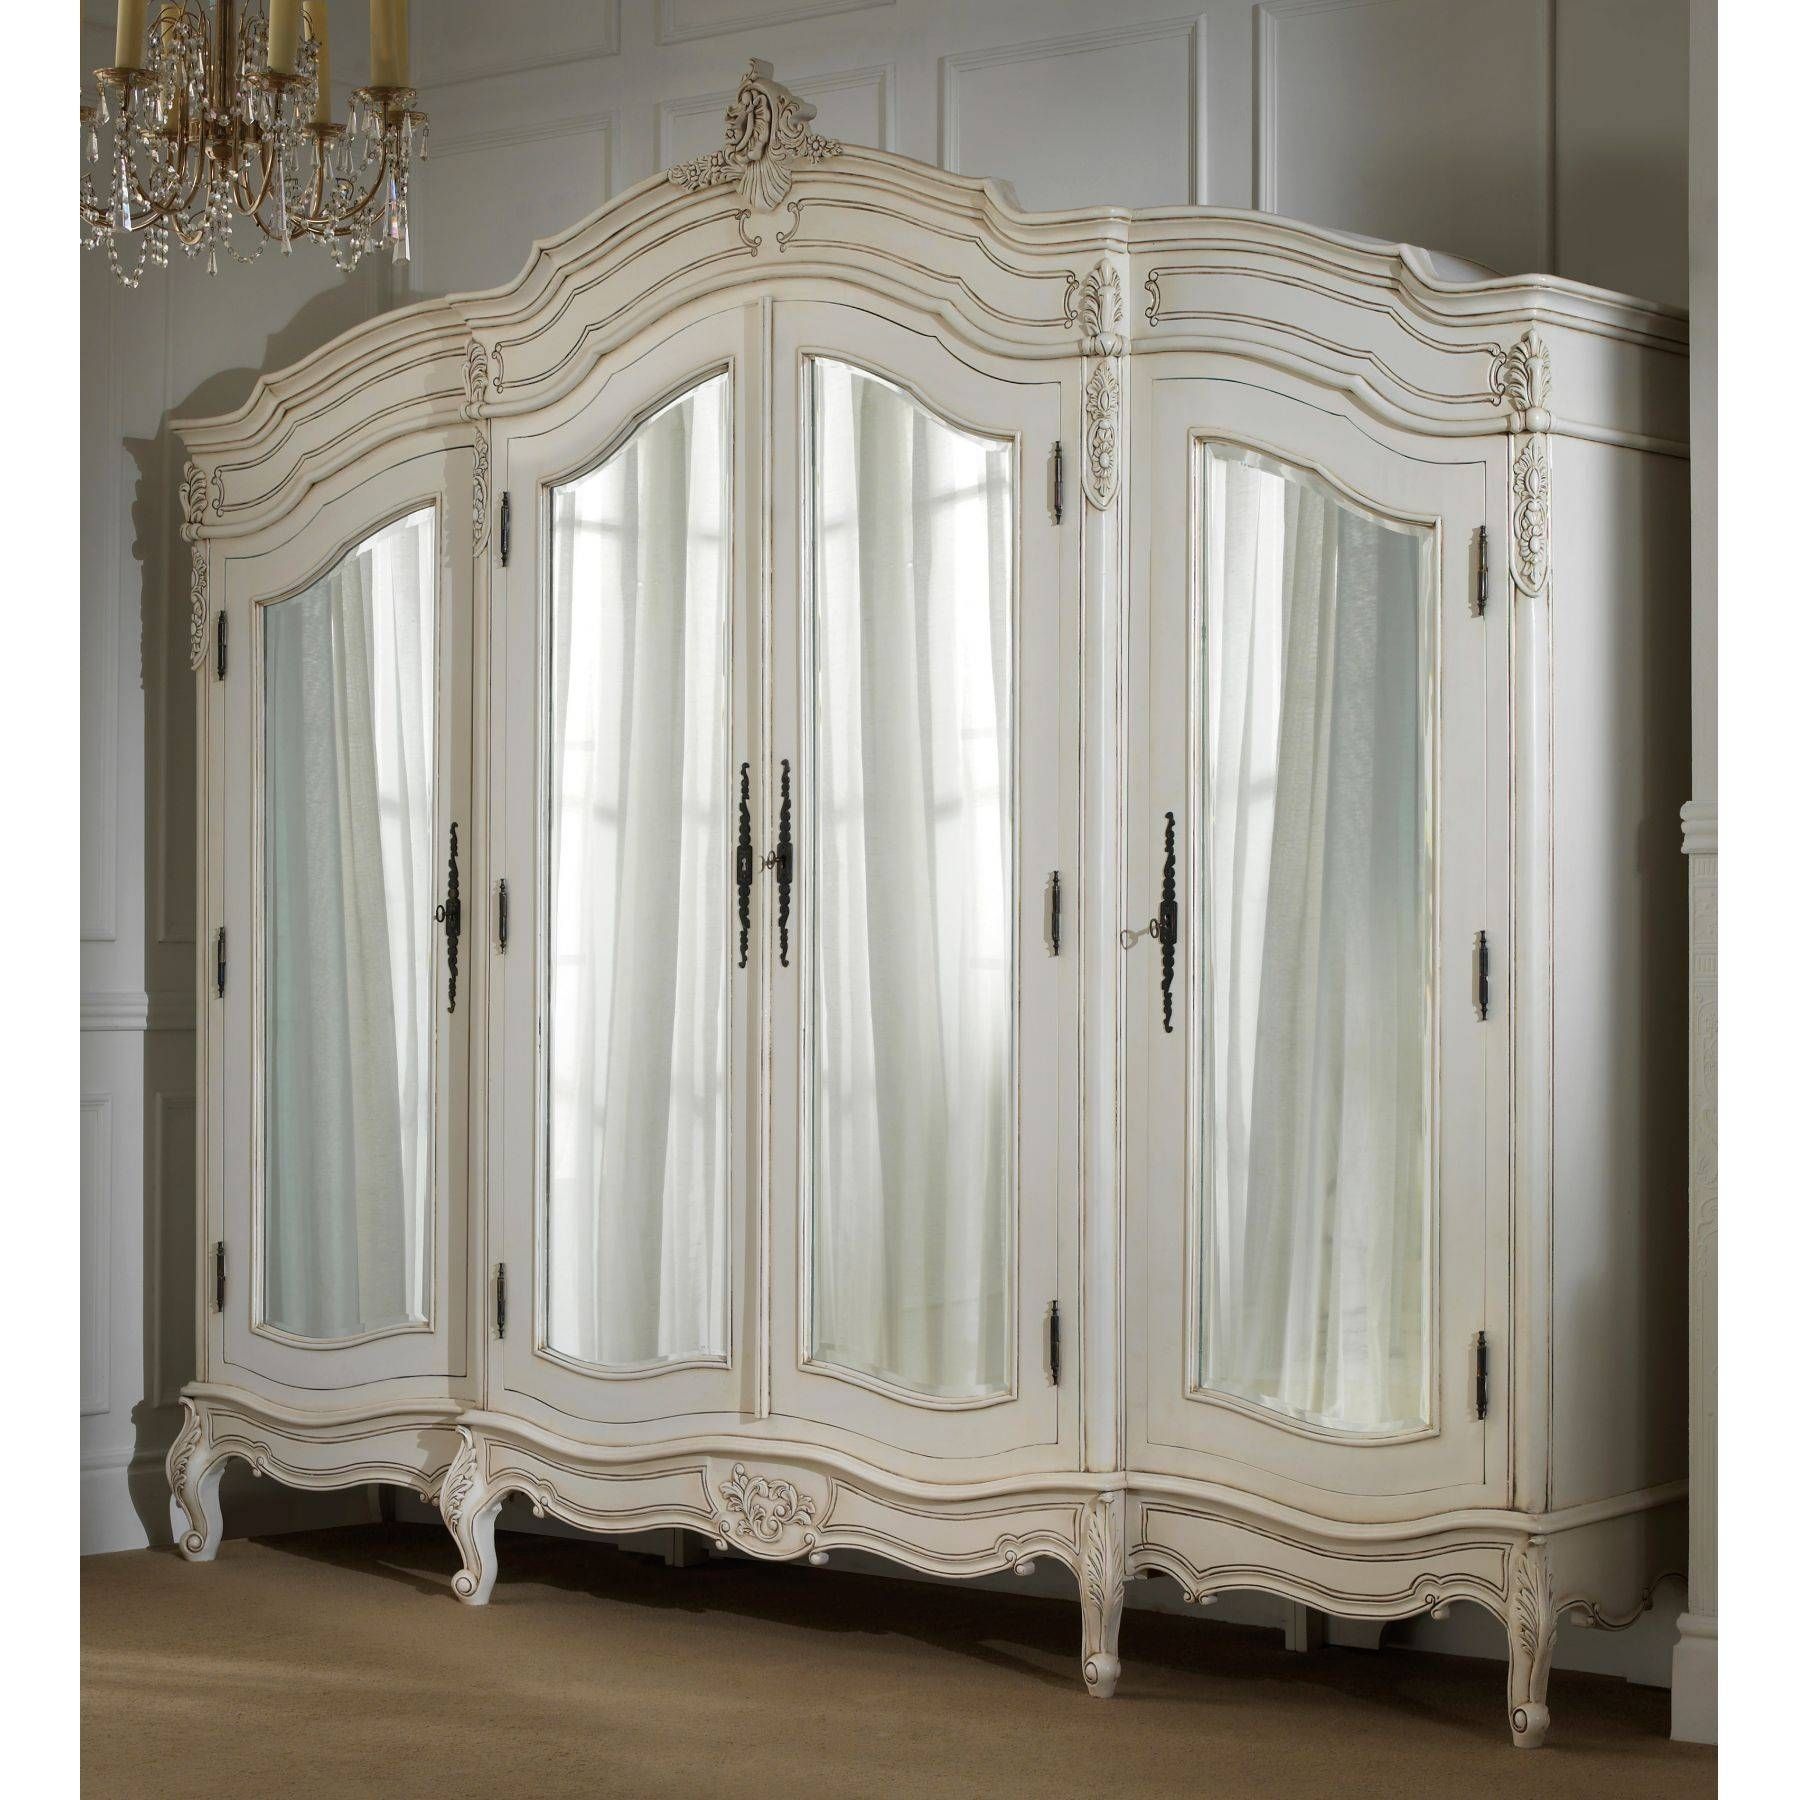 Ikea Closet Design Cheap Armoire Bedroom Armoir Makrillarnacom Pertaining To Cheap French Style Wardrobes (View 7 of 15)